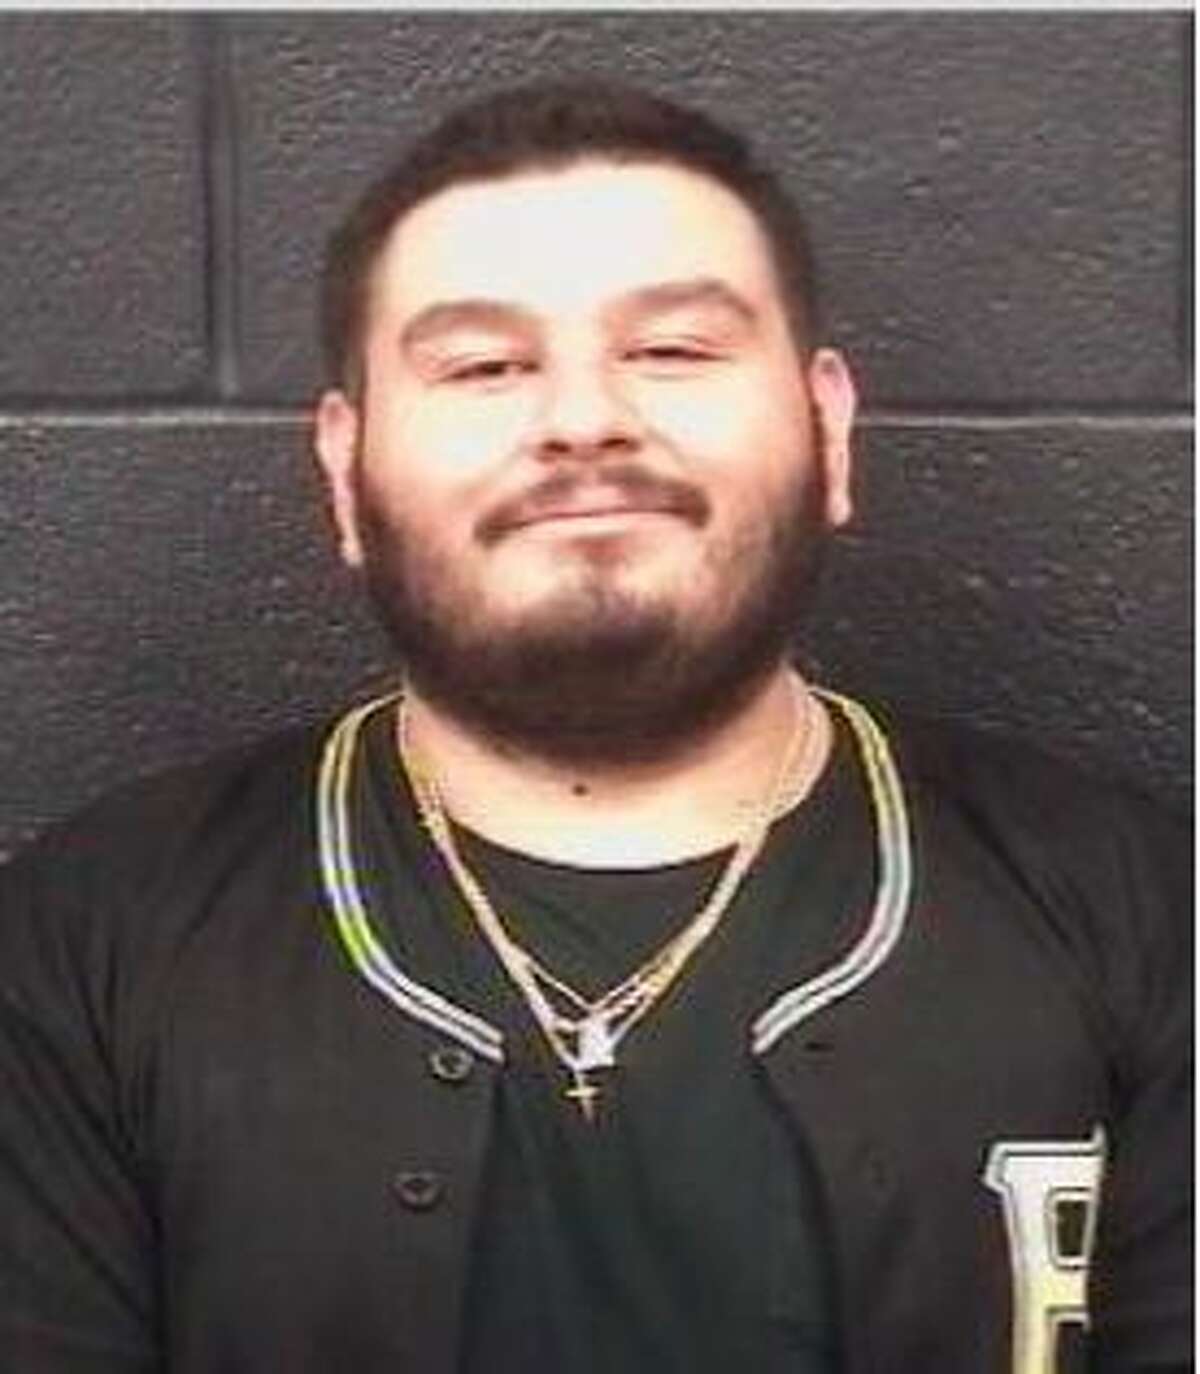 Rudy Lara was charged with driving while intoxicated with a blood alcohol content greater than or equal to 0.15.